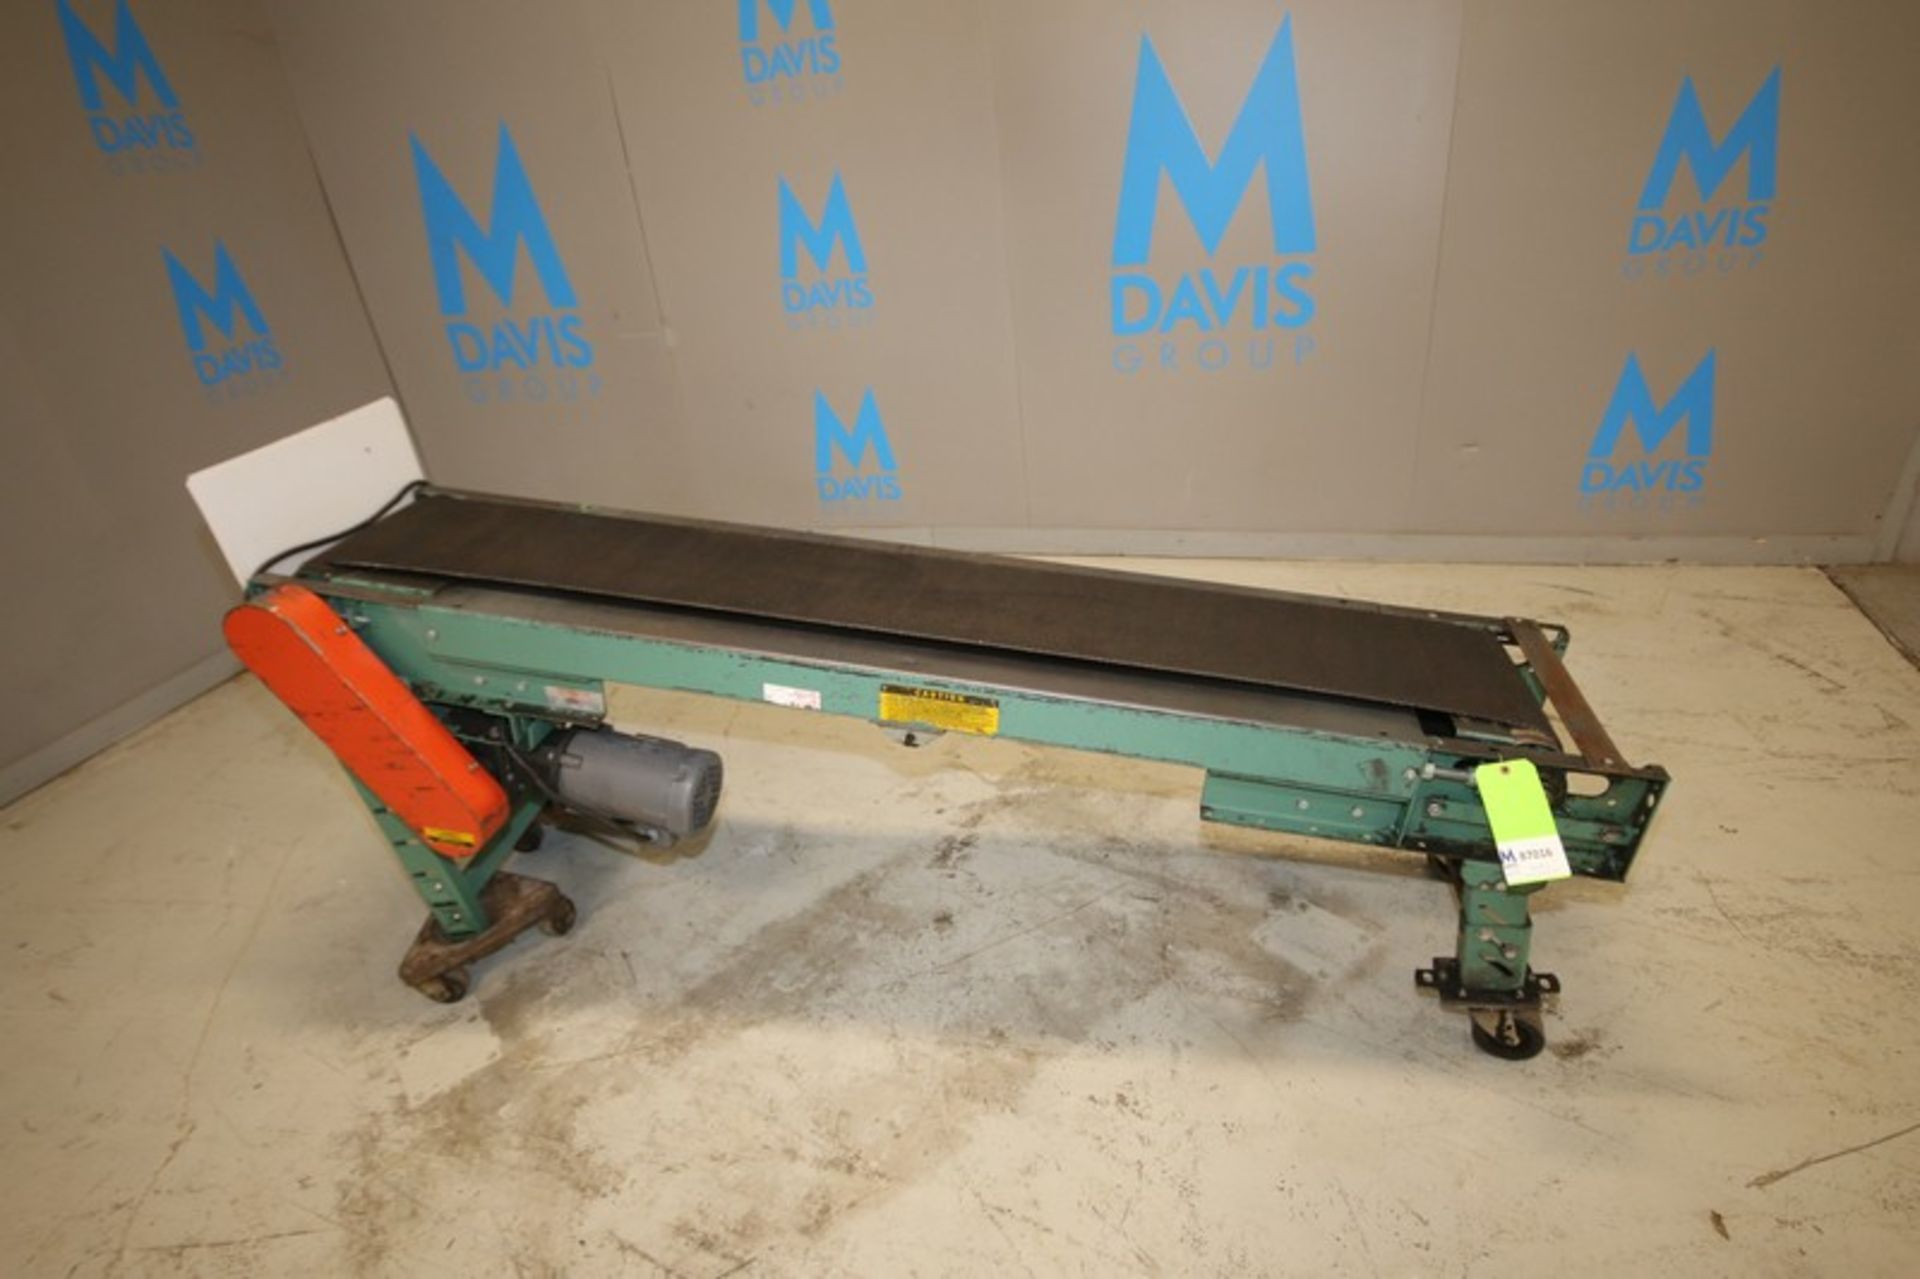 Hytrol 7'L x 12" W, Inclined Belt Conveyor w/Drive (INV#87016)(Located @ the MDG Auction Showroom in